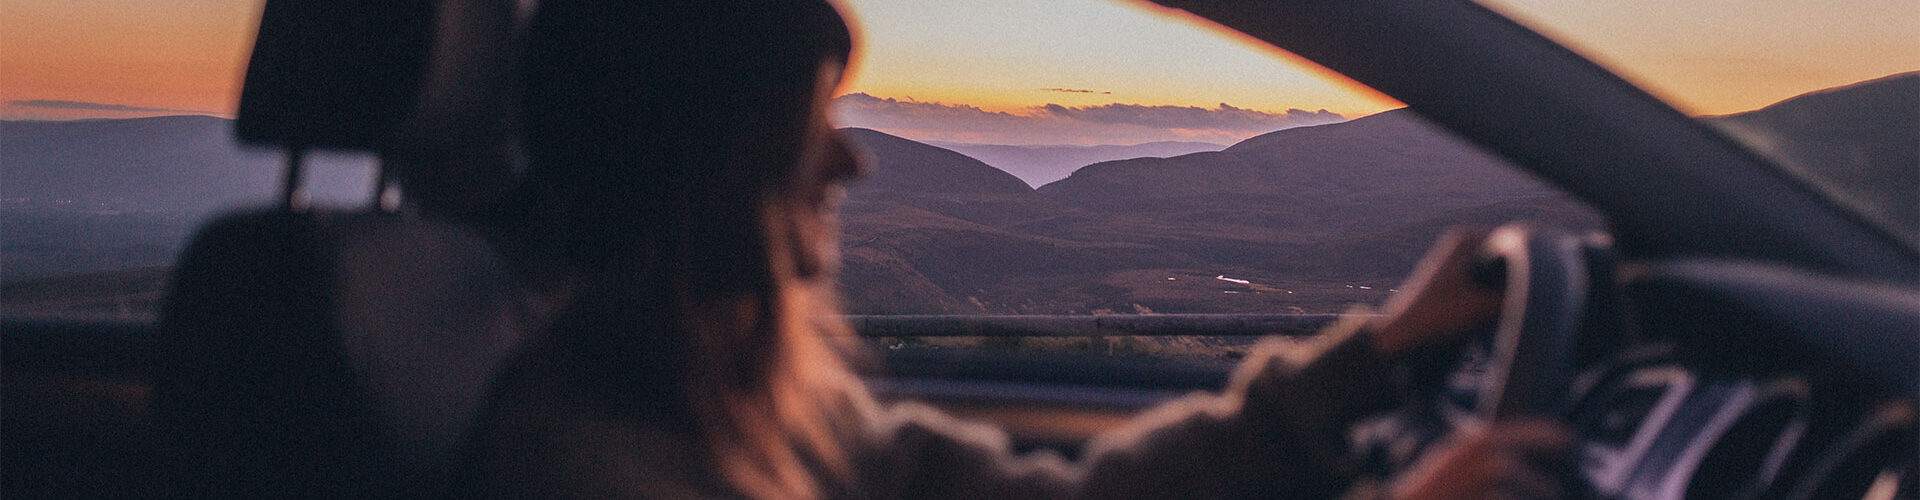 Women driving at sunset with mountainous background